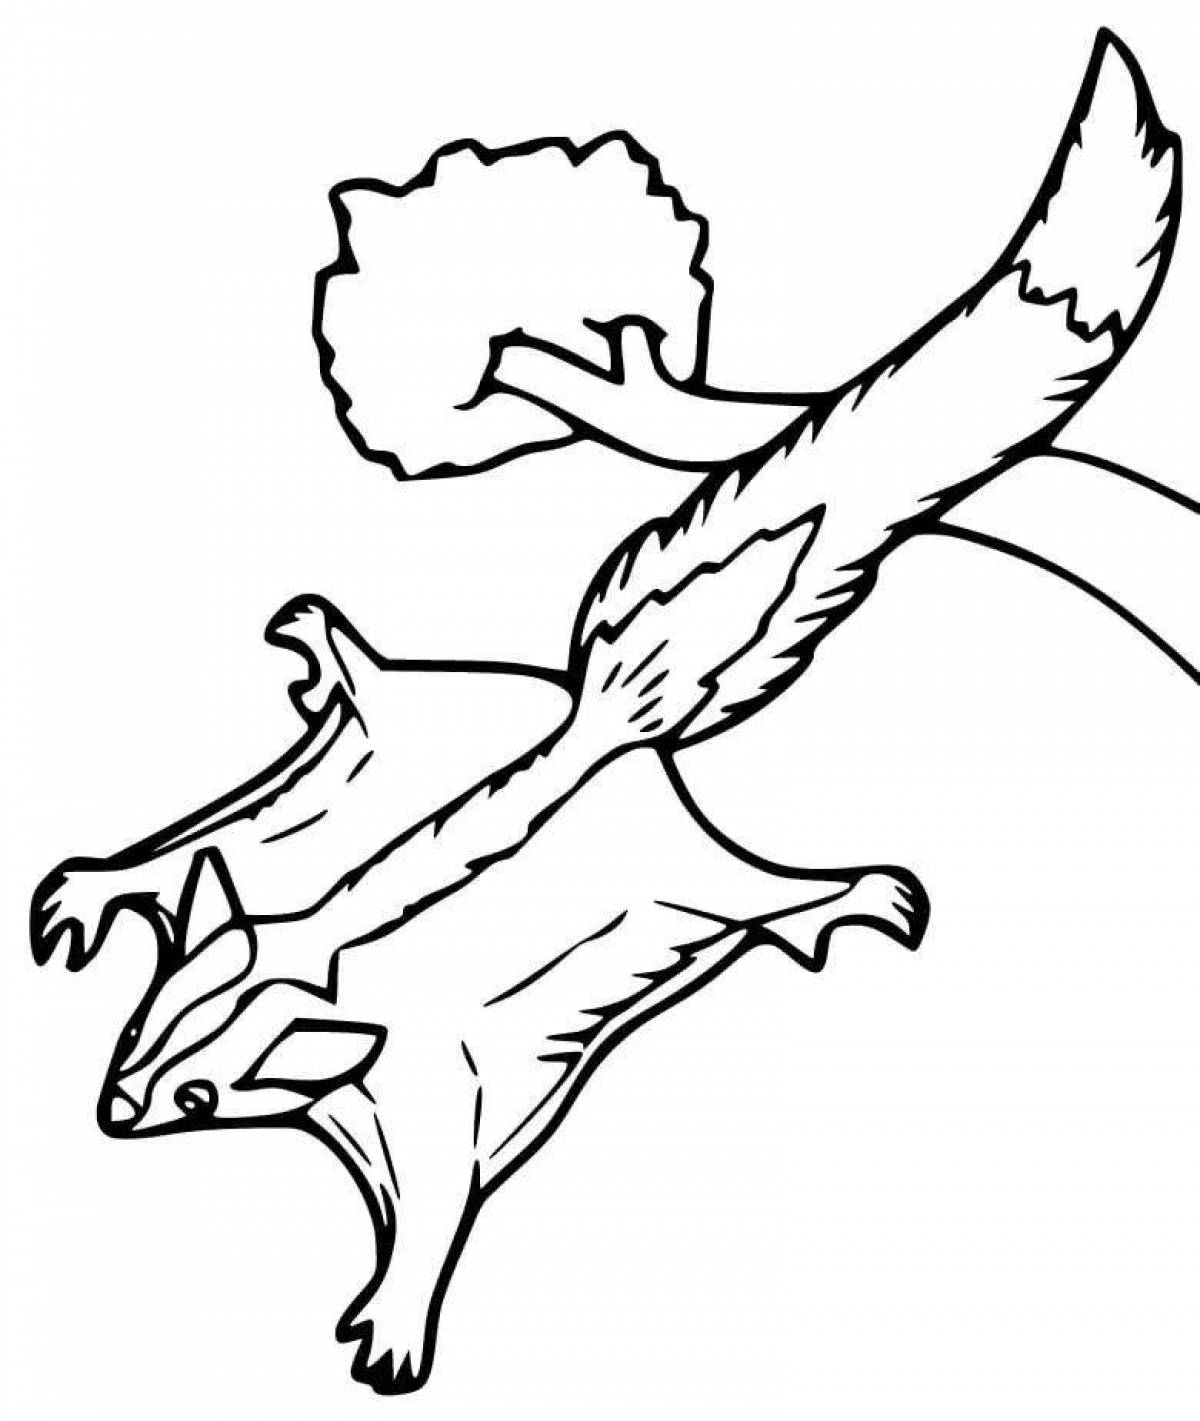 Flying squirrel coloring page